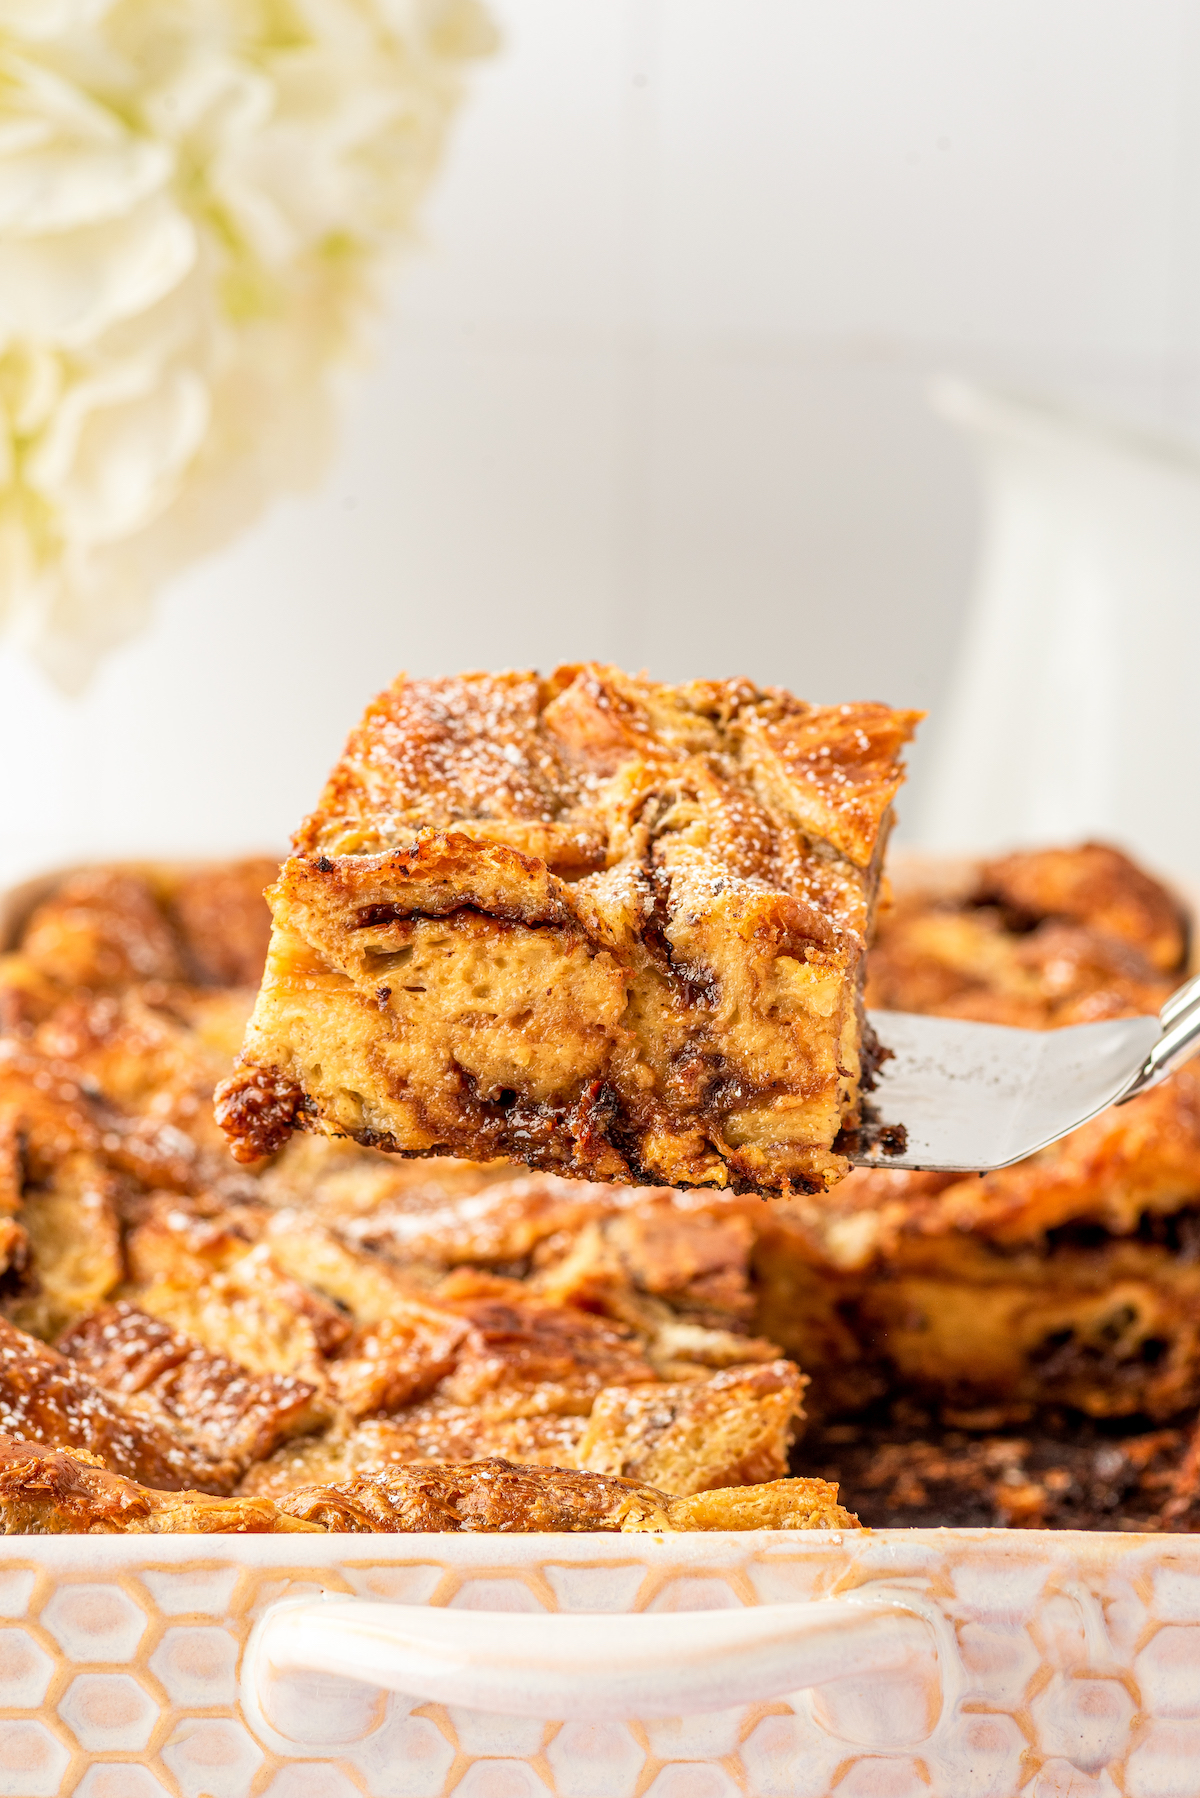 A square of chocolate-hazelnut bread pudding being lifted from a dish.